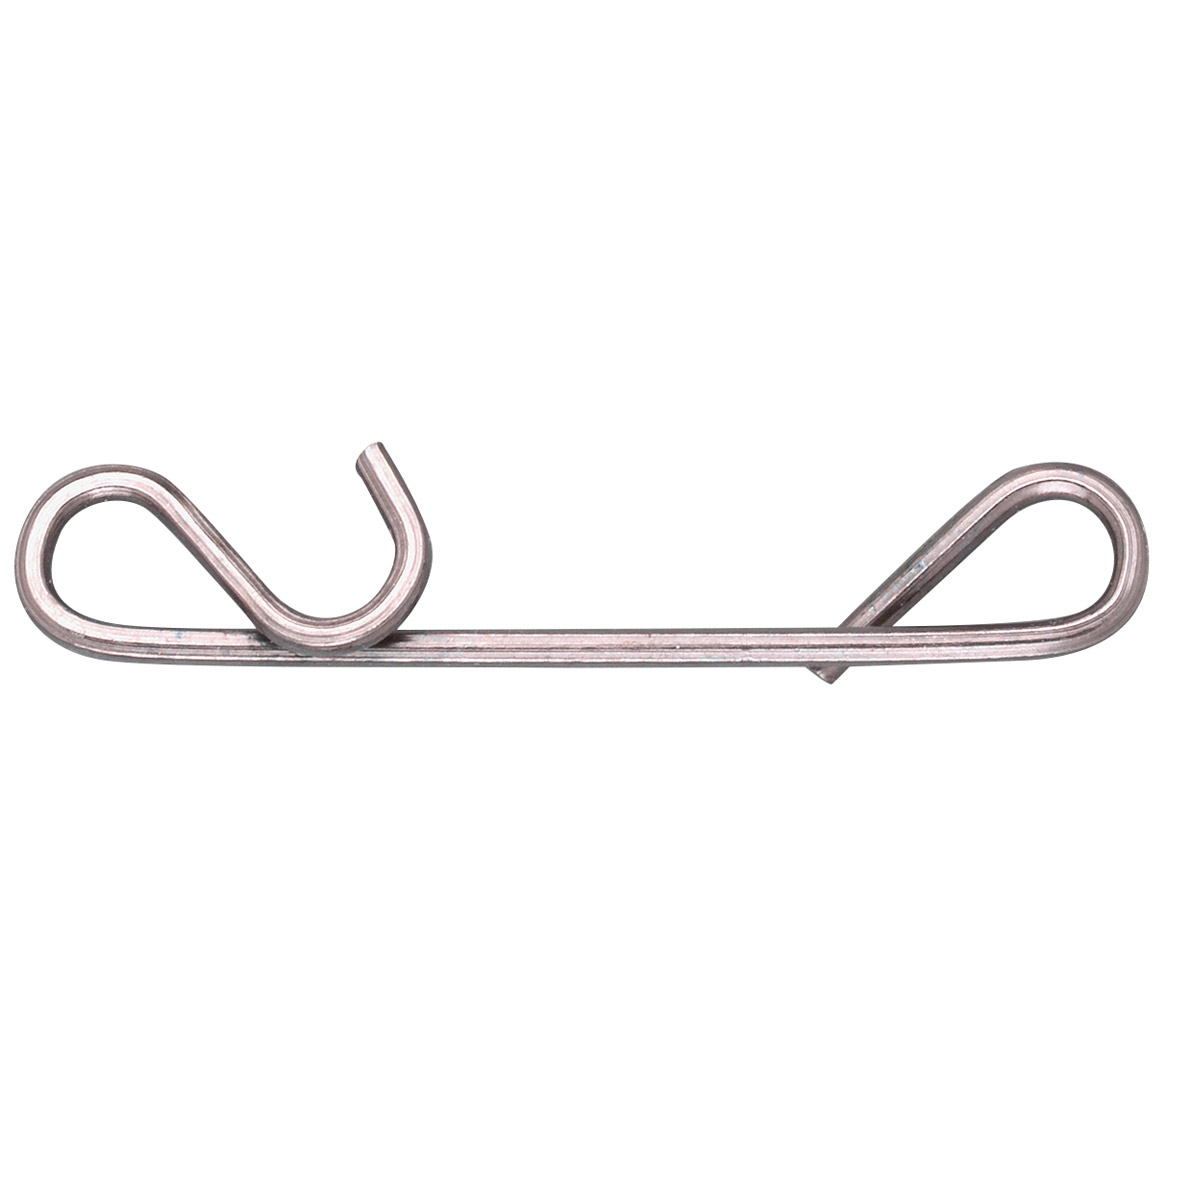 Spro No-knot Link -  XL